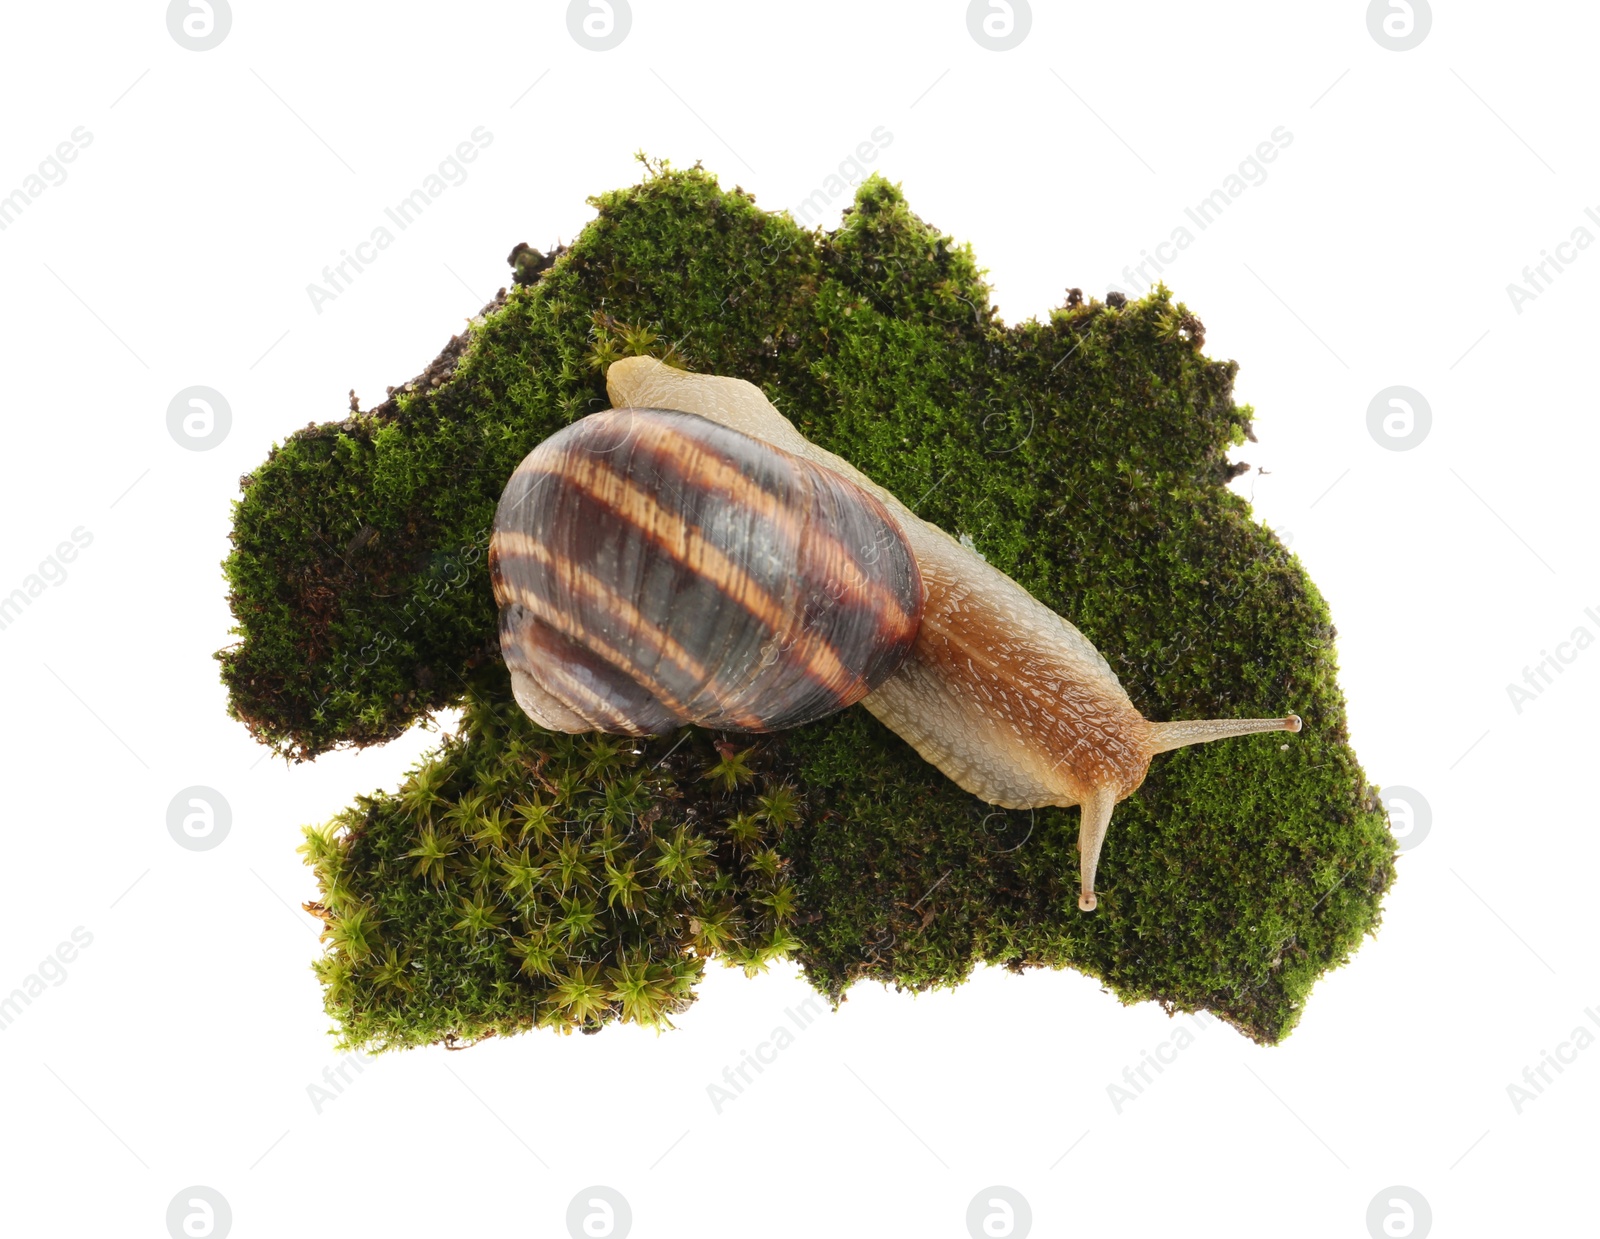 Photo of Common garden snail crawling on green moss against white background, top view